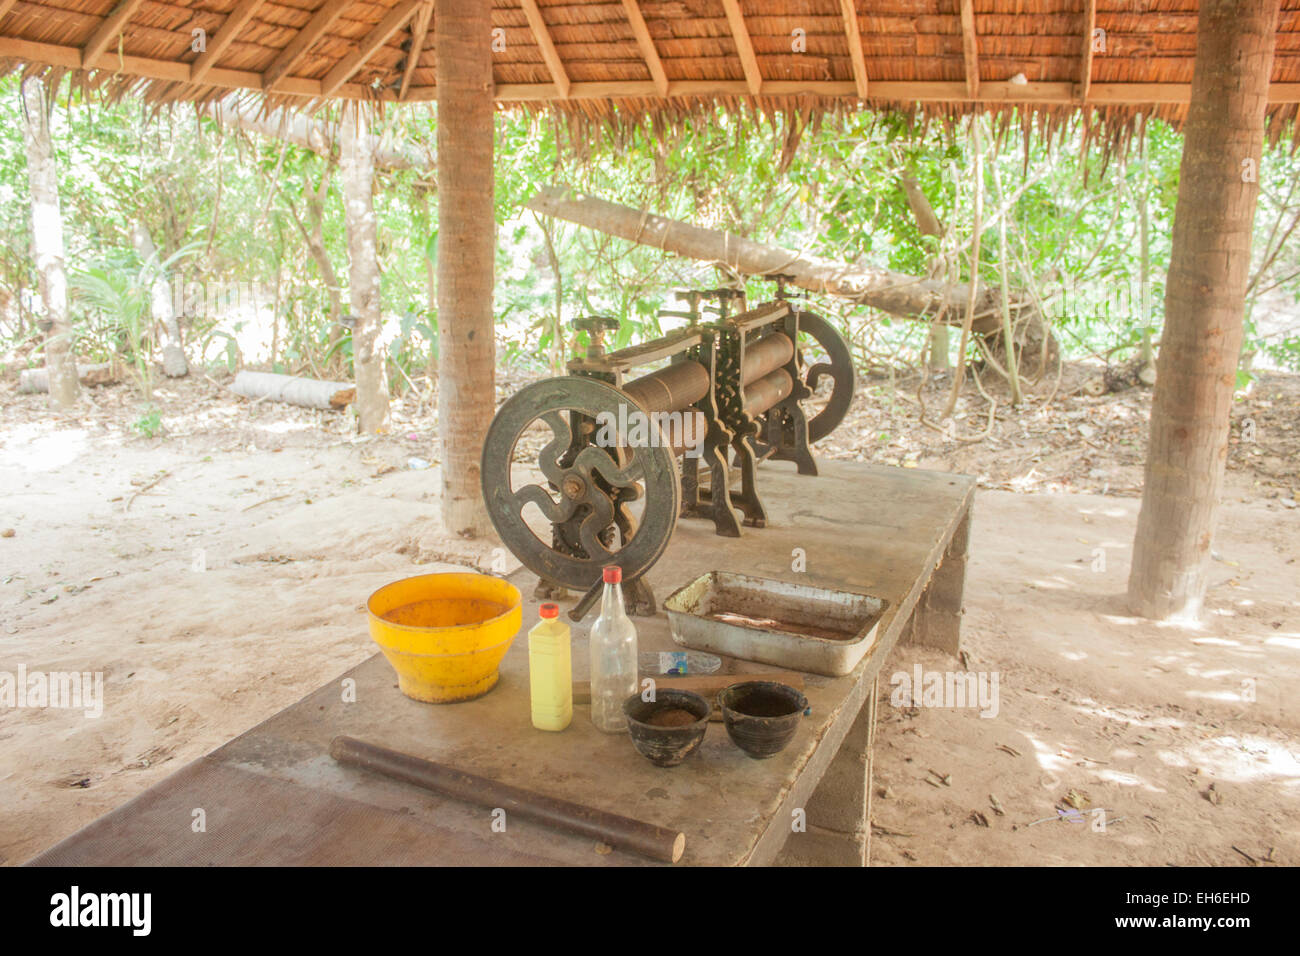 A mangle, used to mangle rubber from rubber trees. In koh samui, Thailand Stock Photo